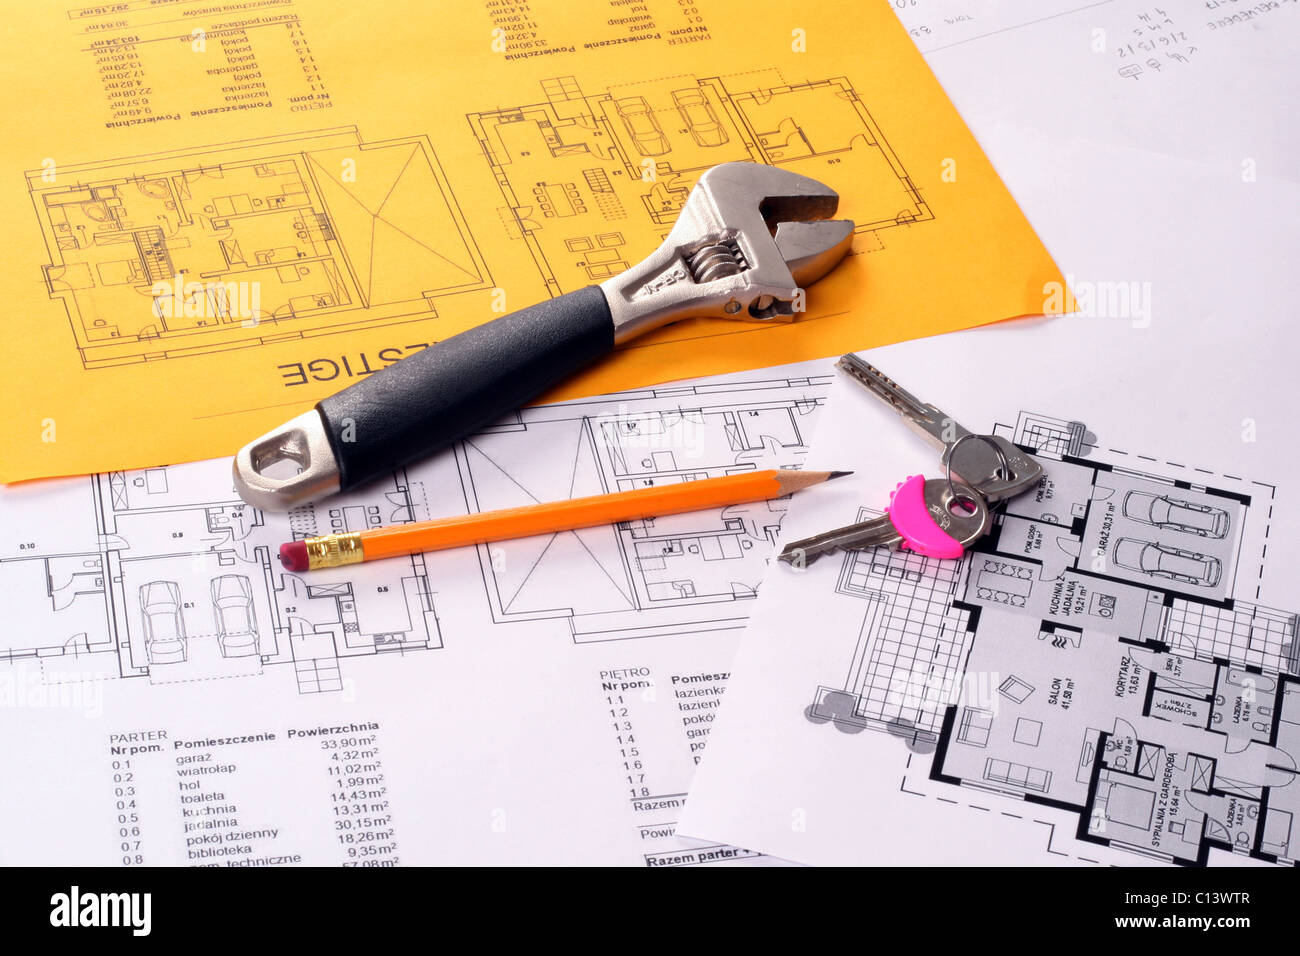 Tools on Blueprints including monkey wrench, keys and pencil House plans printed on white and yellow paper Stock Photo